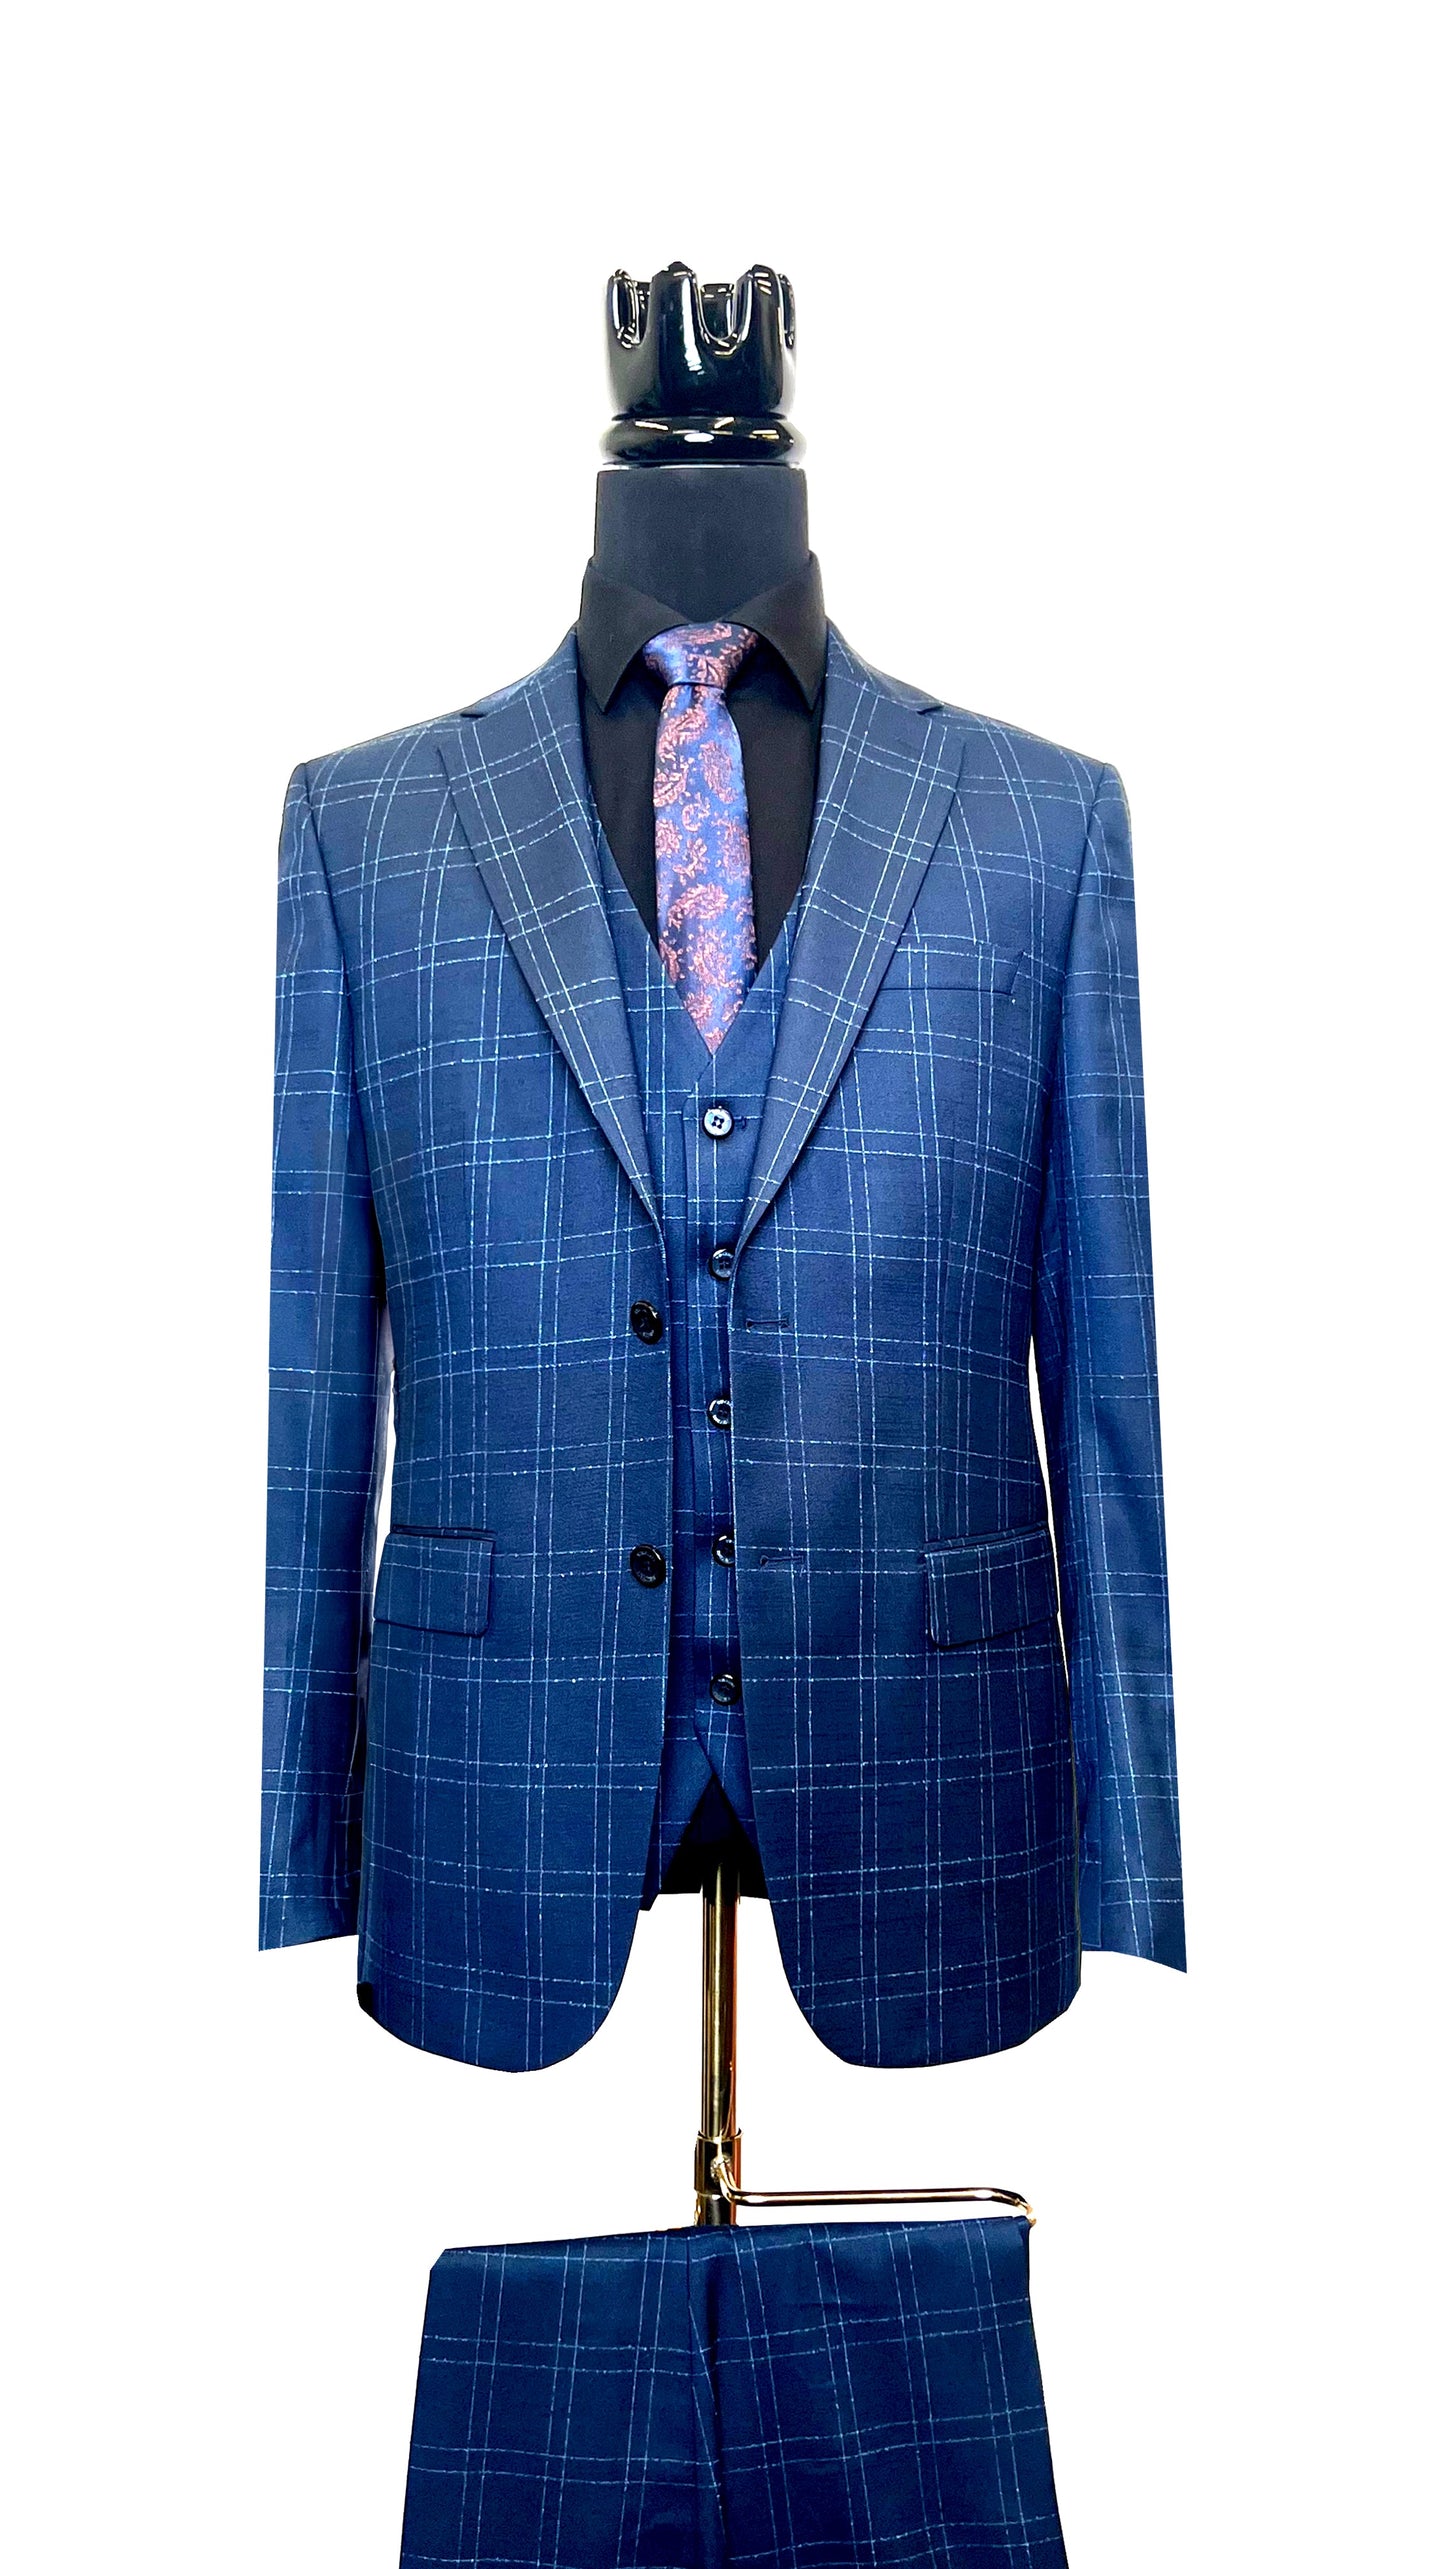 Navy blue suit with blue lines